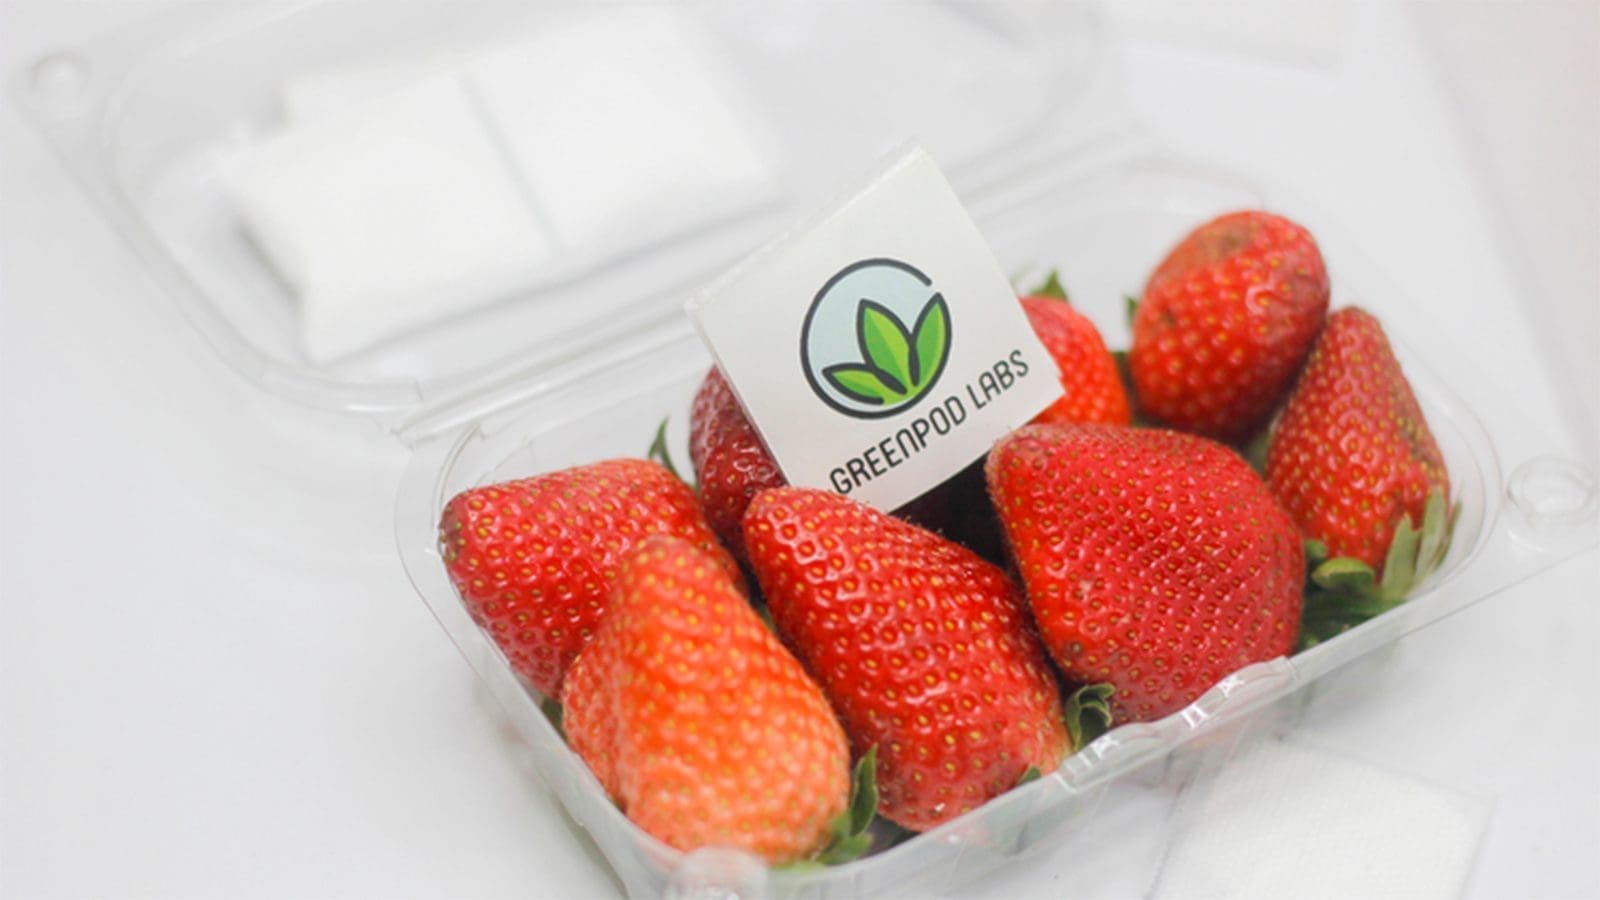 GreenPod Labs receives approval for its active packaging solution